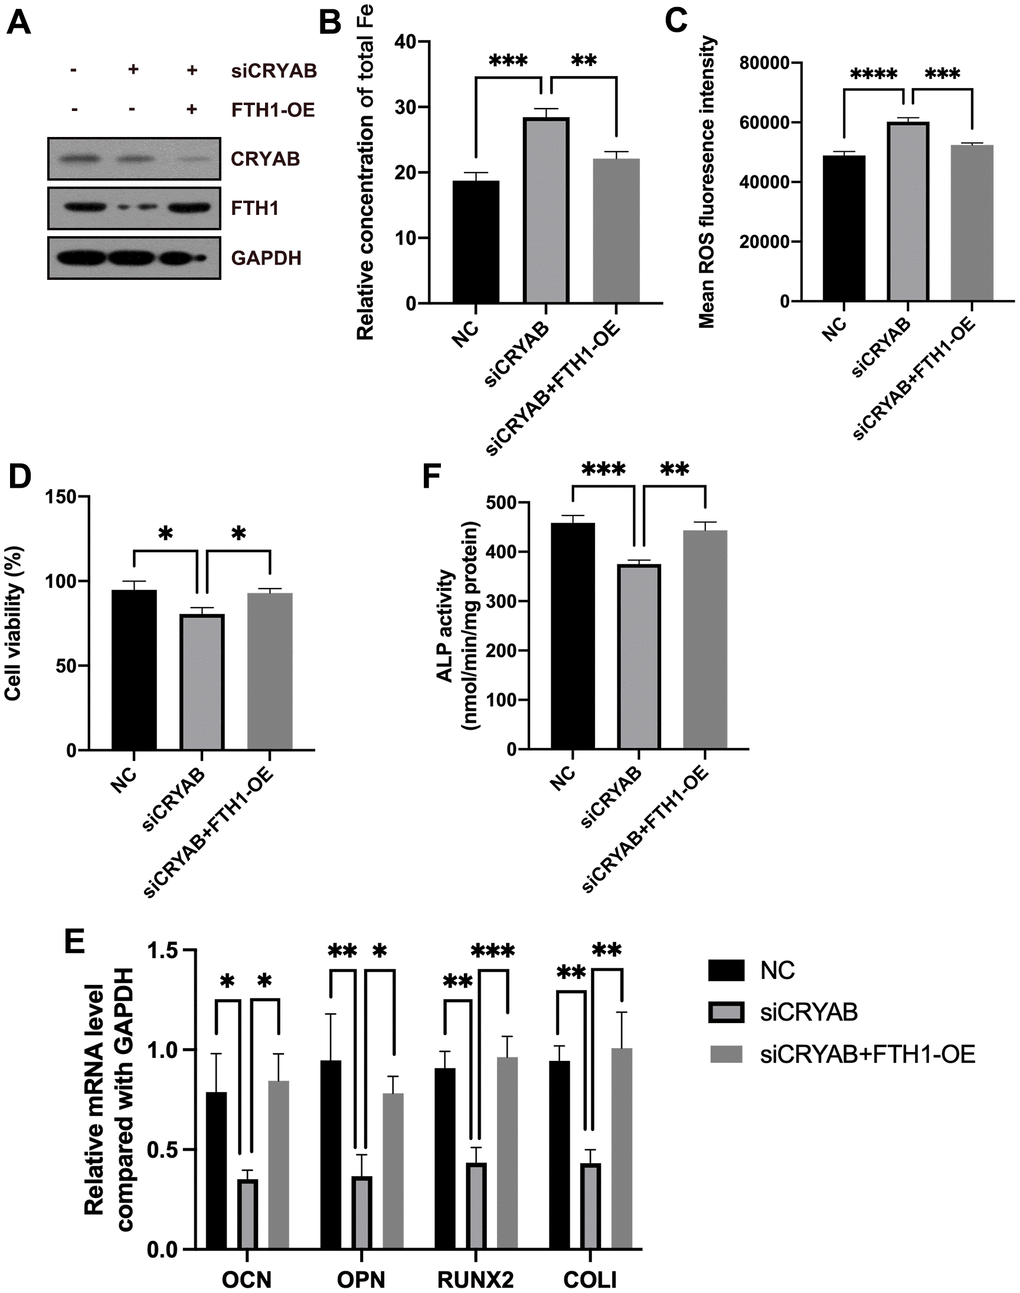 CRYAB regulates ferroptosis and osteogenic differentiation of BMSCs in an FTH1-dependent manner. (A) The protein levels of CRYAB and FTH1 were detected using a Western blotting assay (n=3). (B–D) Cellular Fe and ROS levels and cell viability were detected (n=3). (E) mRNA expression levels of OCN, OPN, RUNX2, and COLI were detected using qRT-PCR (n=3). (F) The activity of ALP was detected using an Alkaline Phosphatase Assay Kit (n=3). *: p p p p 